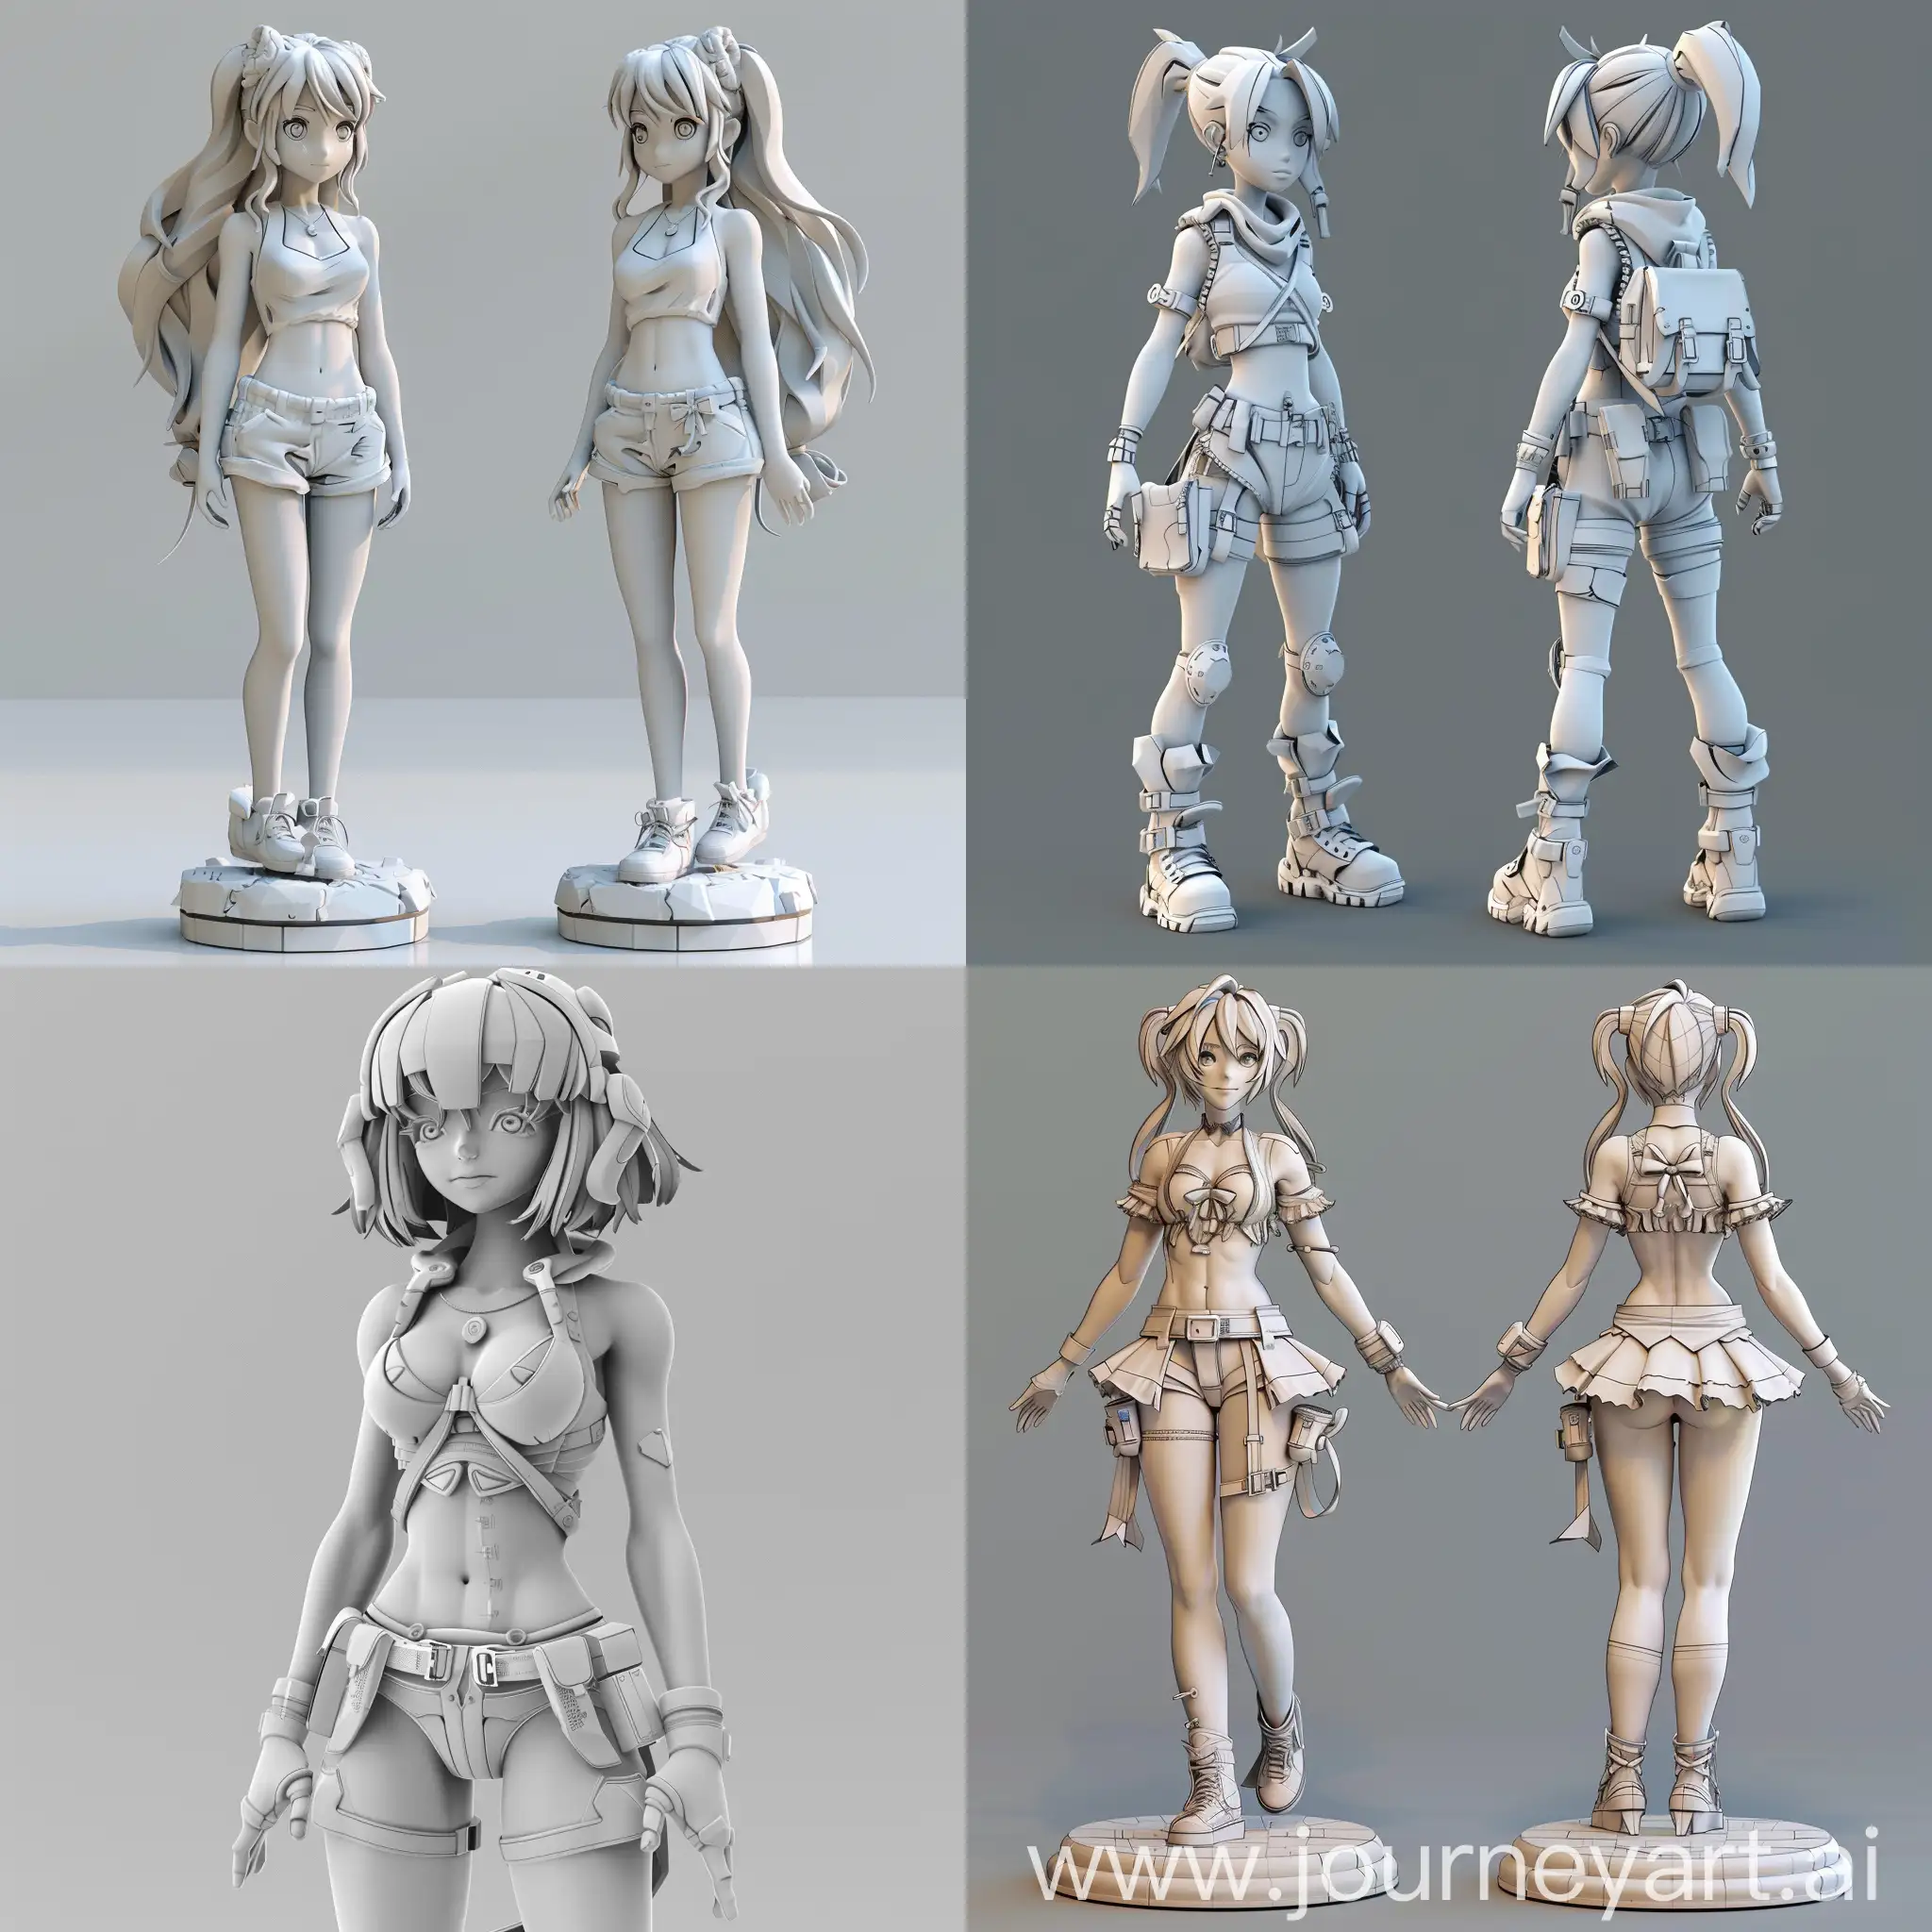 crate me a 2d turnaround of a anime style character for reference to 3d model
